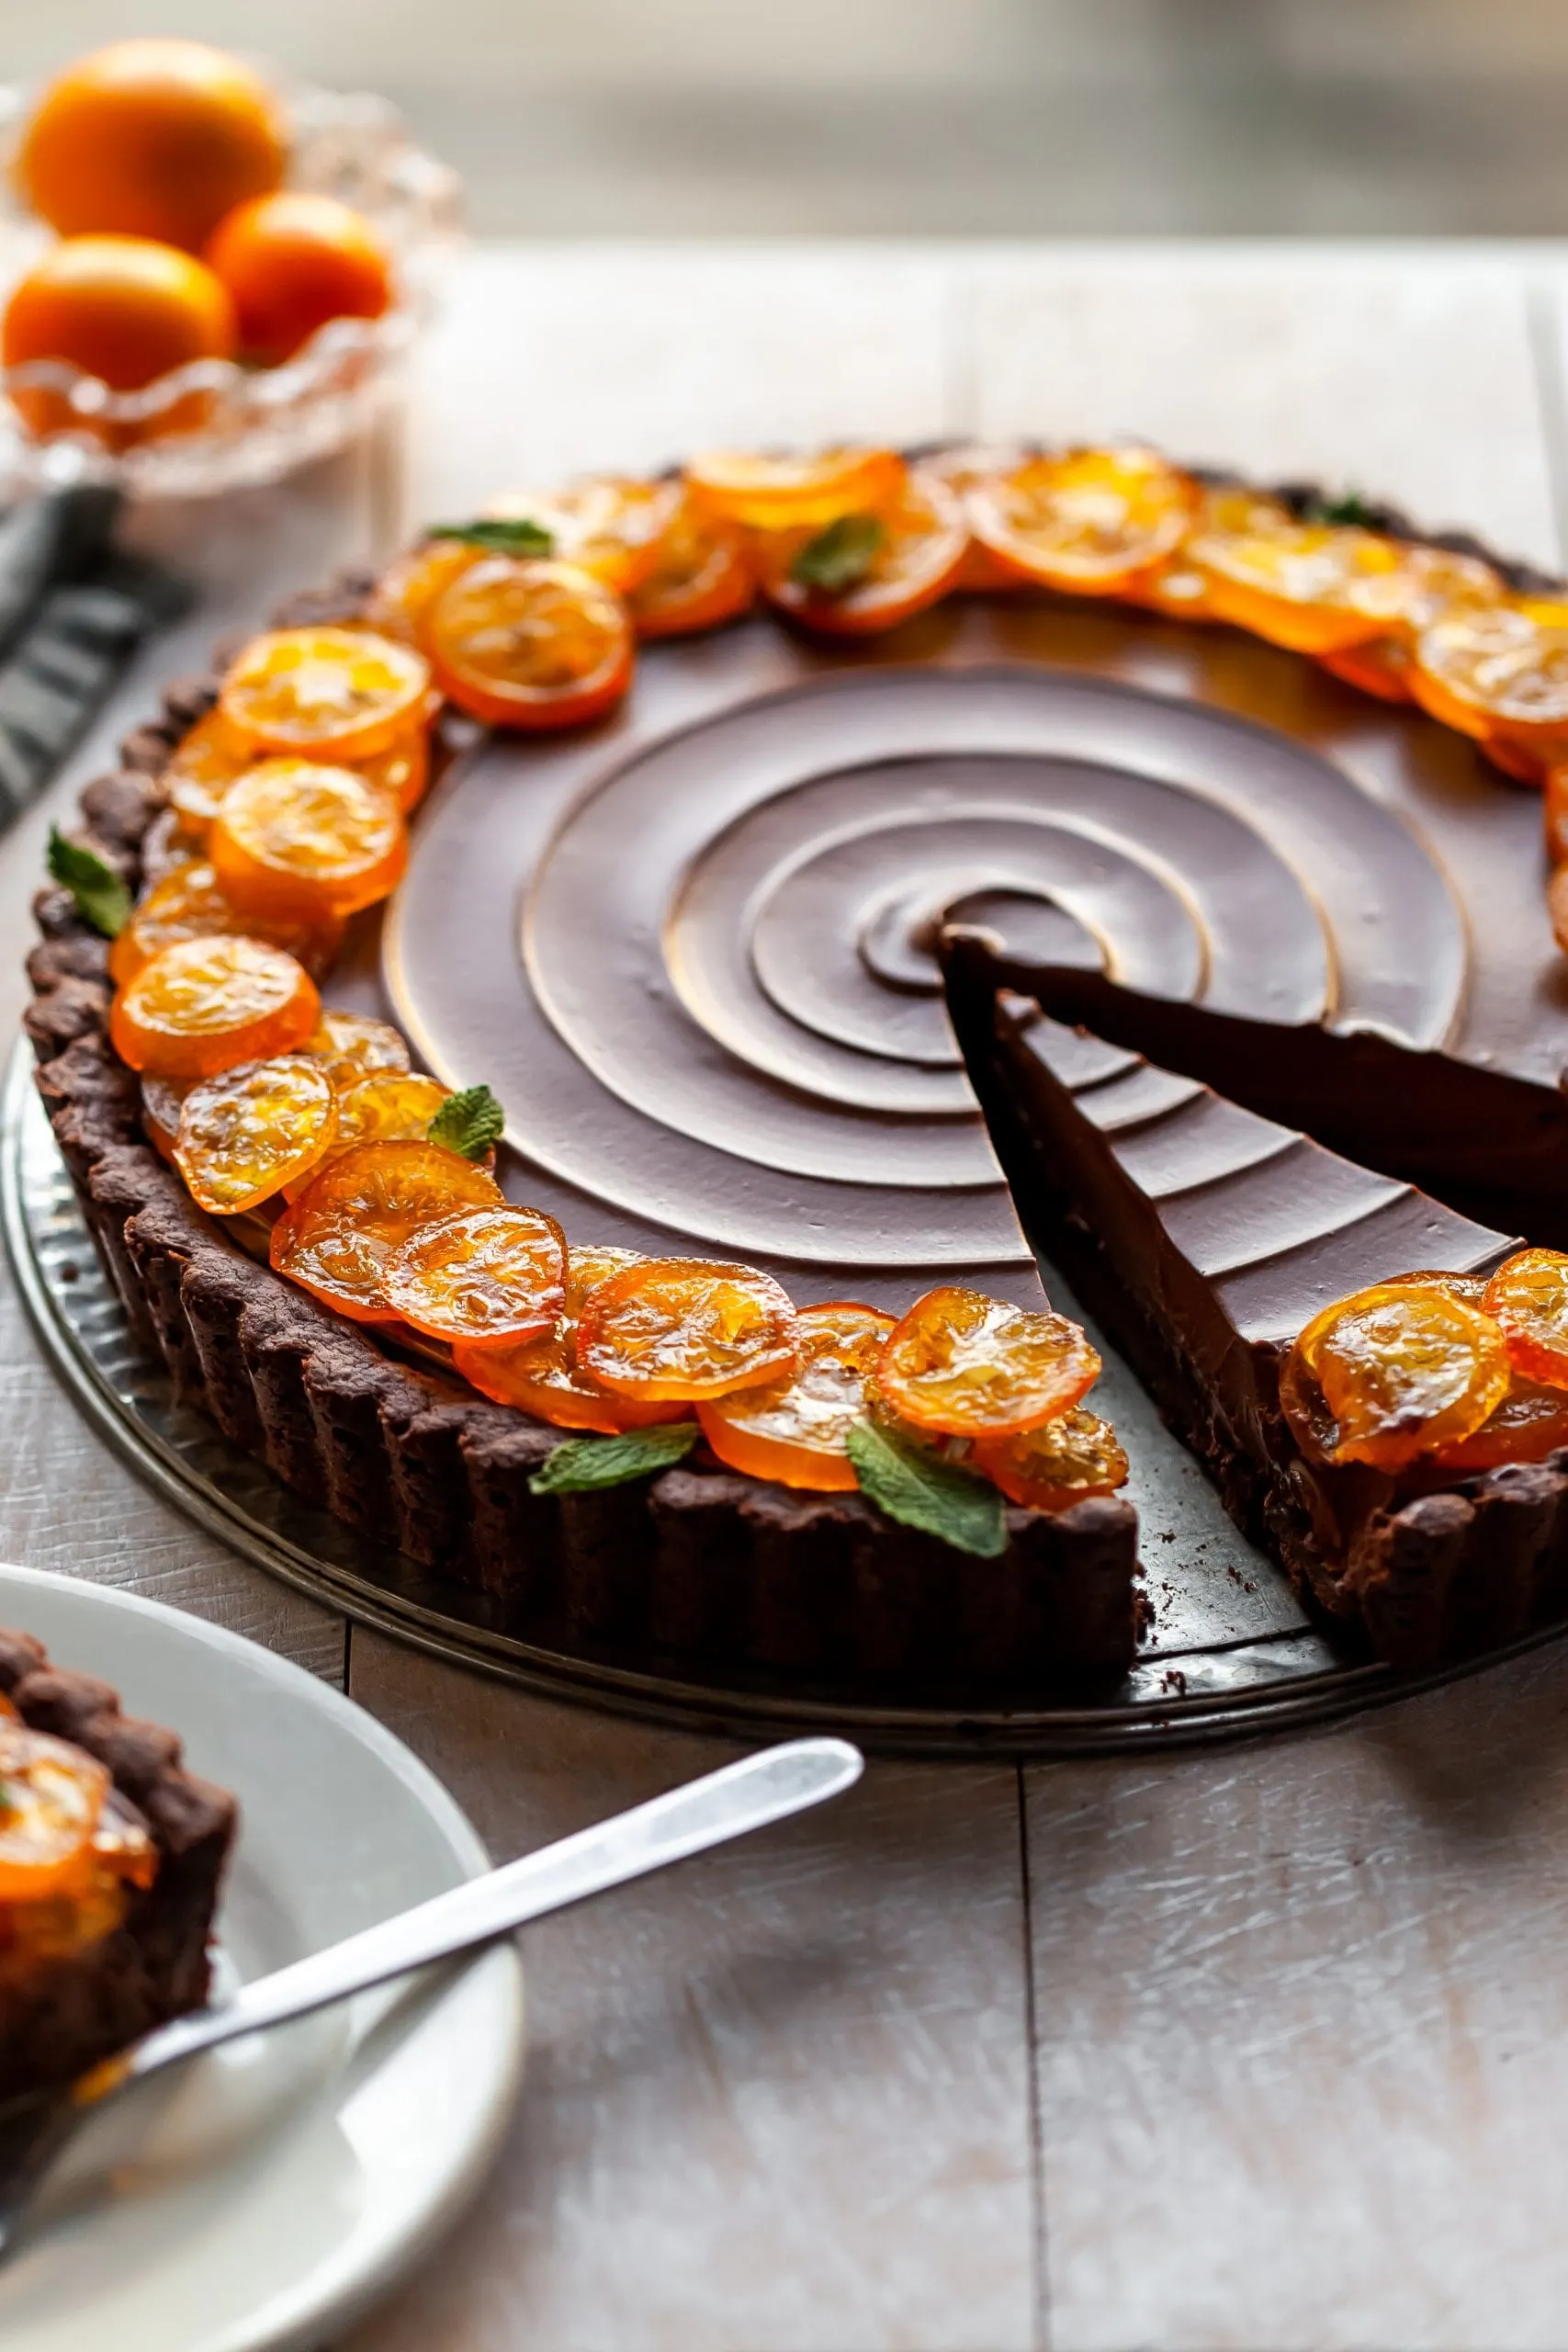 Vegan Chocolate Ornage Tart with Candied Kumquats with 2 slices cut, one is already served on a white plate